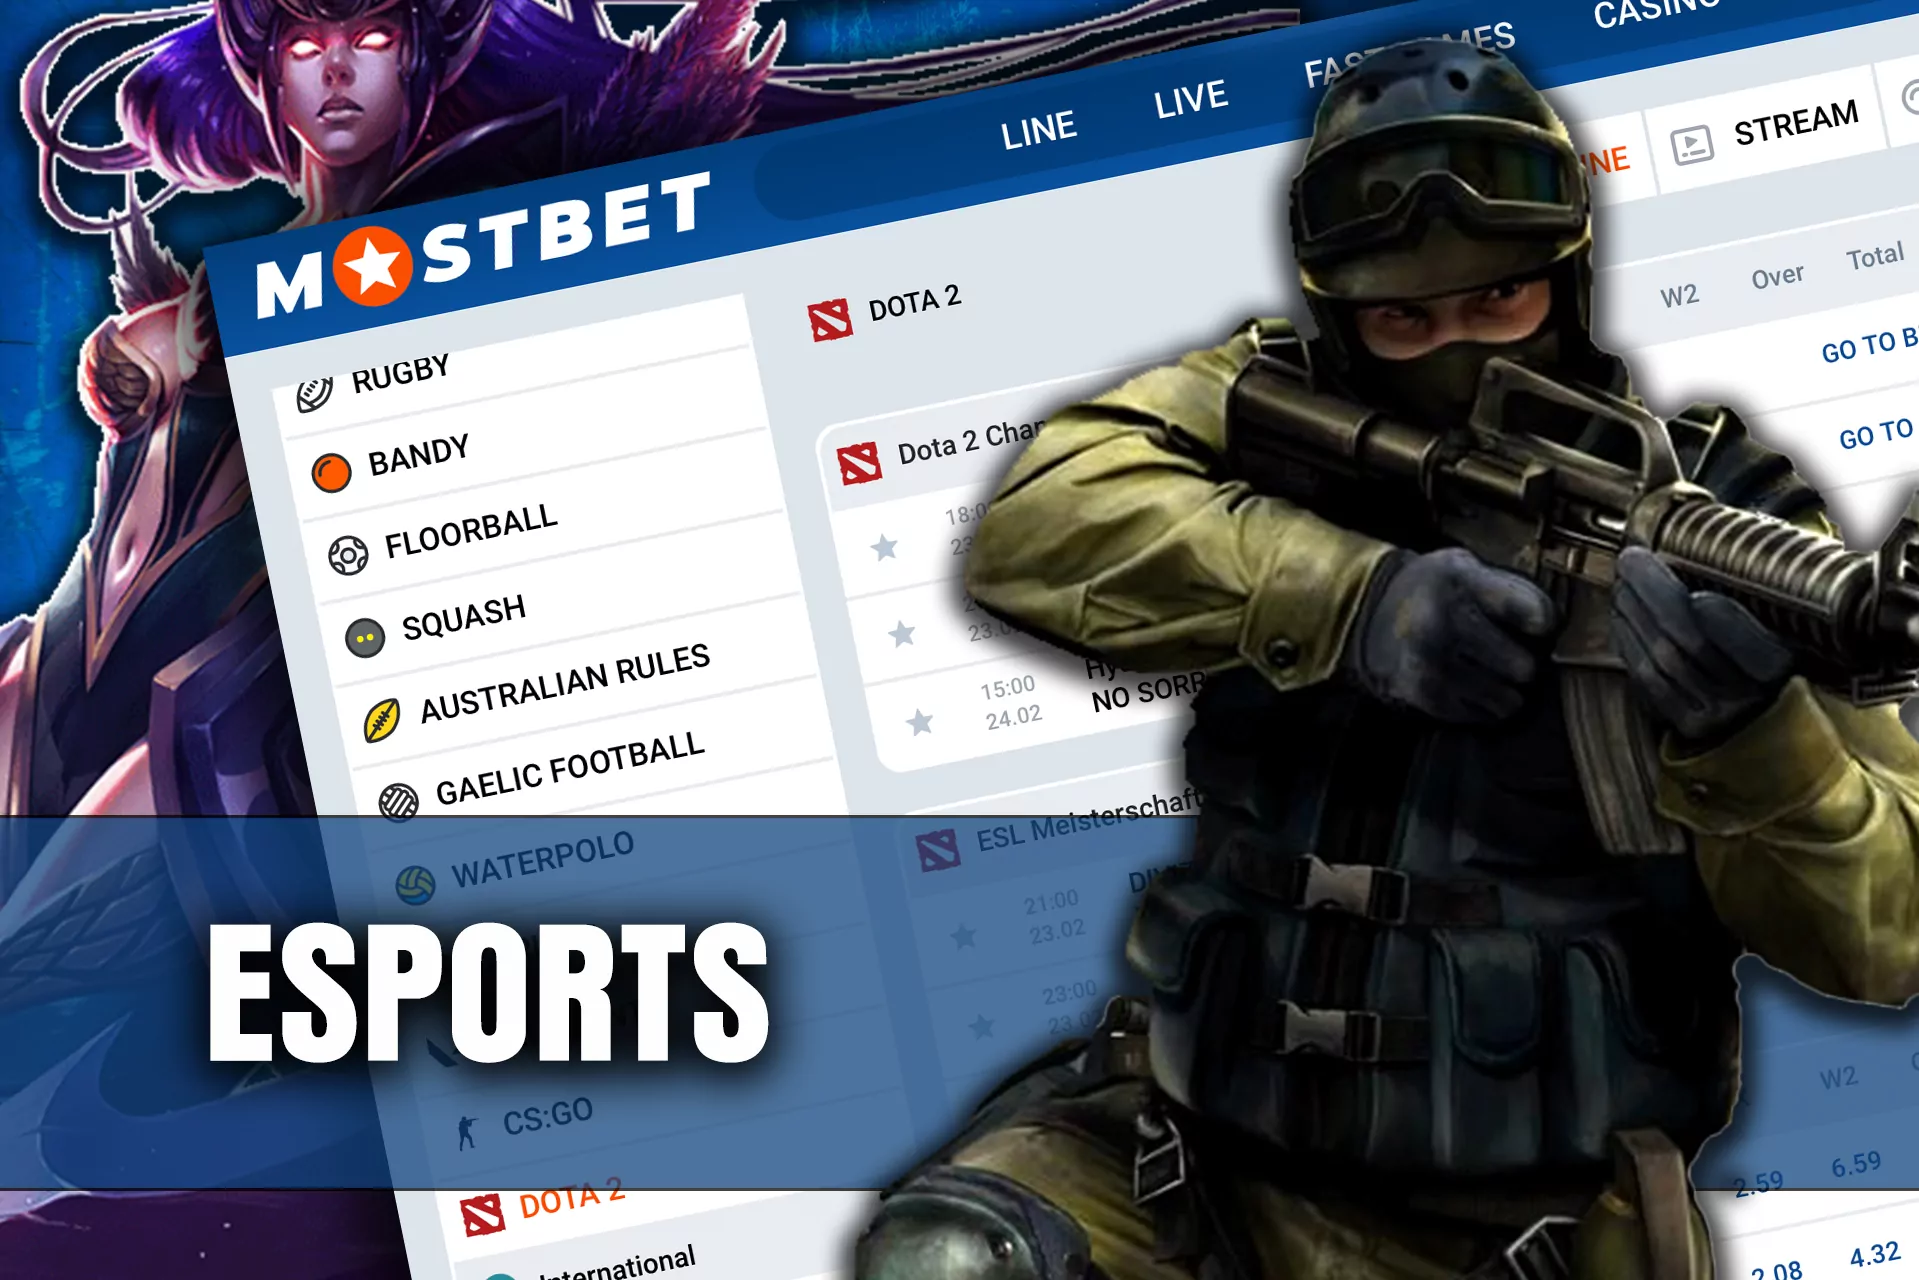 Mostbet provides lots of bonus programs that we recommend to check before betting on esports matches.